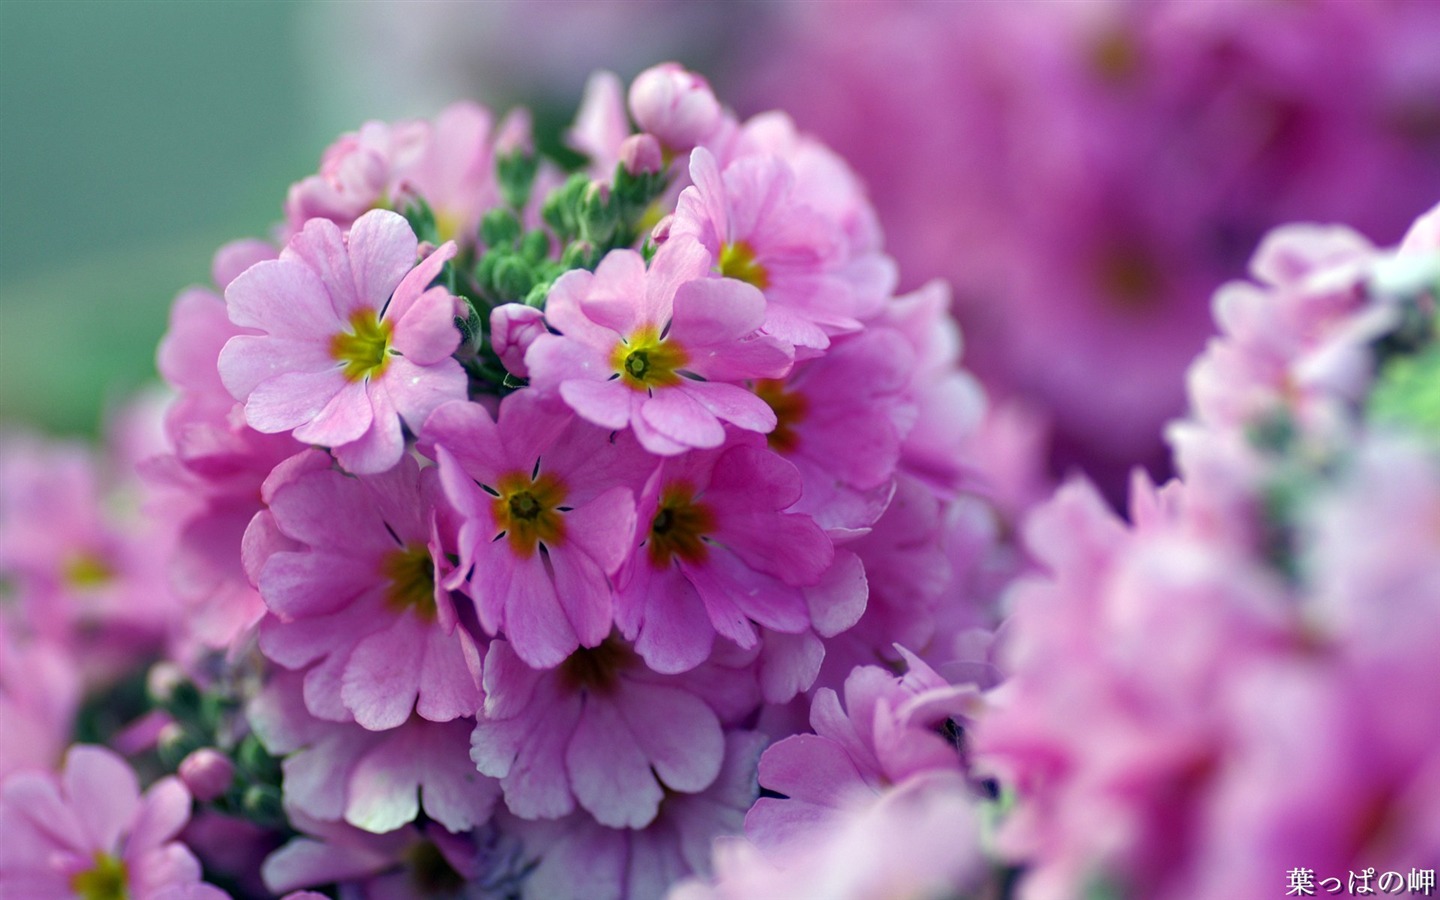 Personal Flowers HD Wallpapers #21 - 1440x900